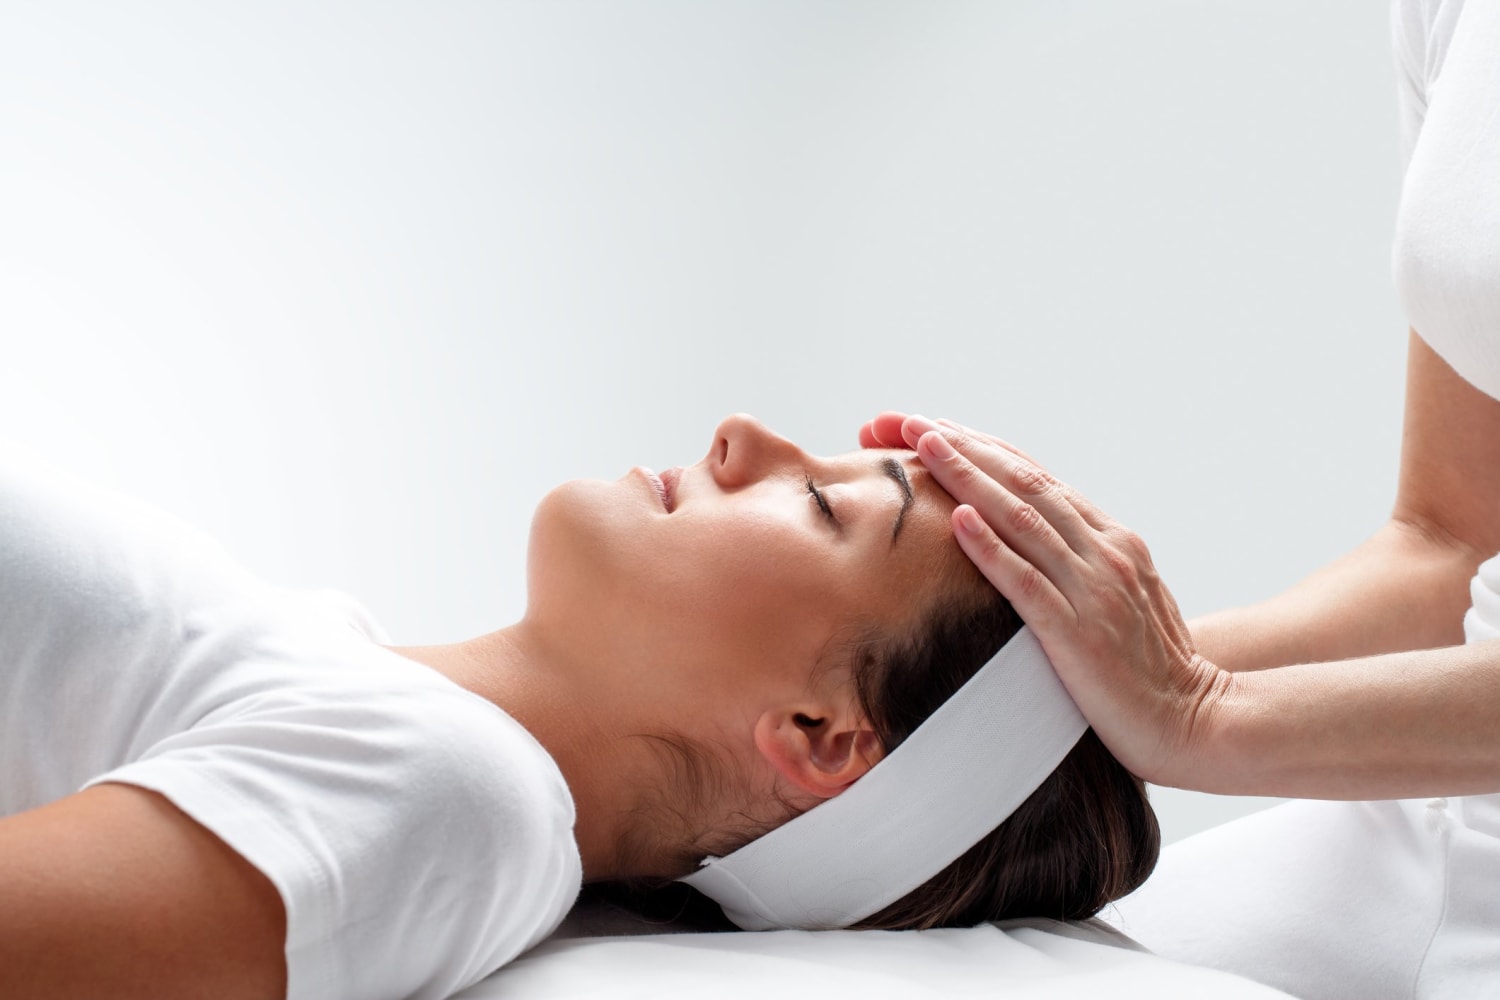 7 Ways to Relieve Pain and Find Wellness with Reiki